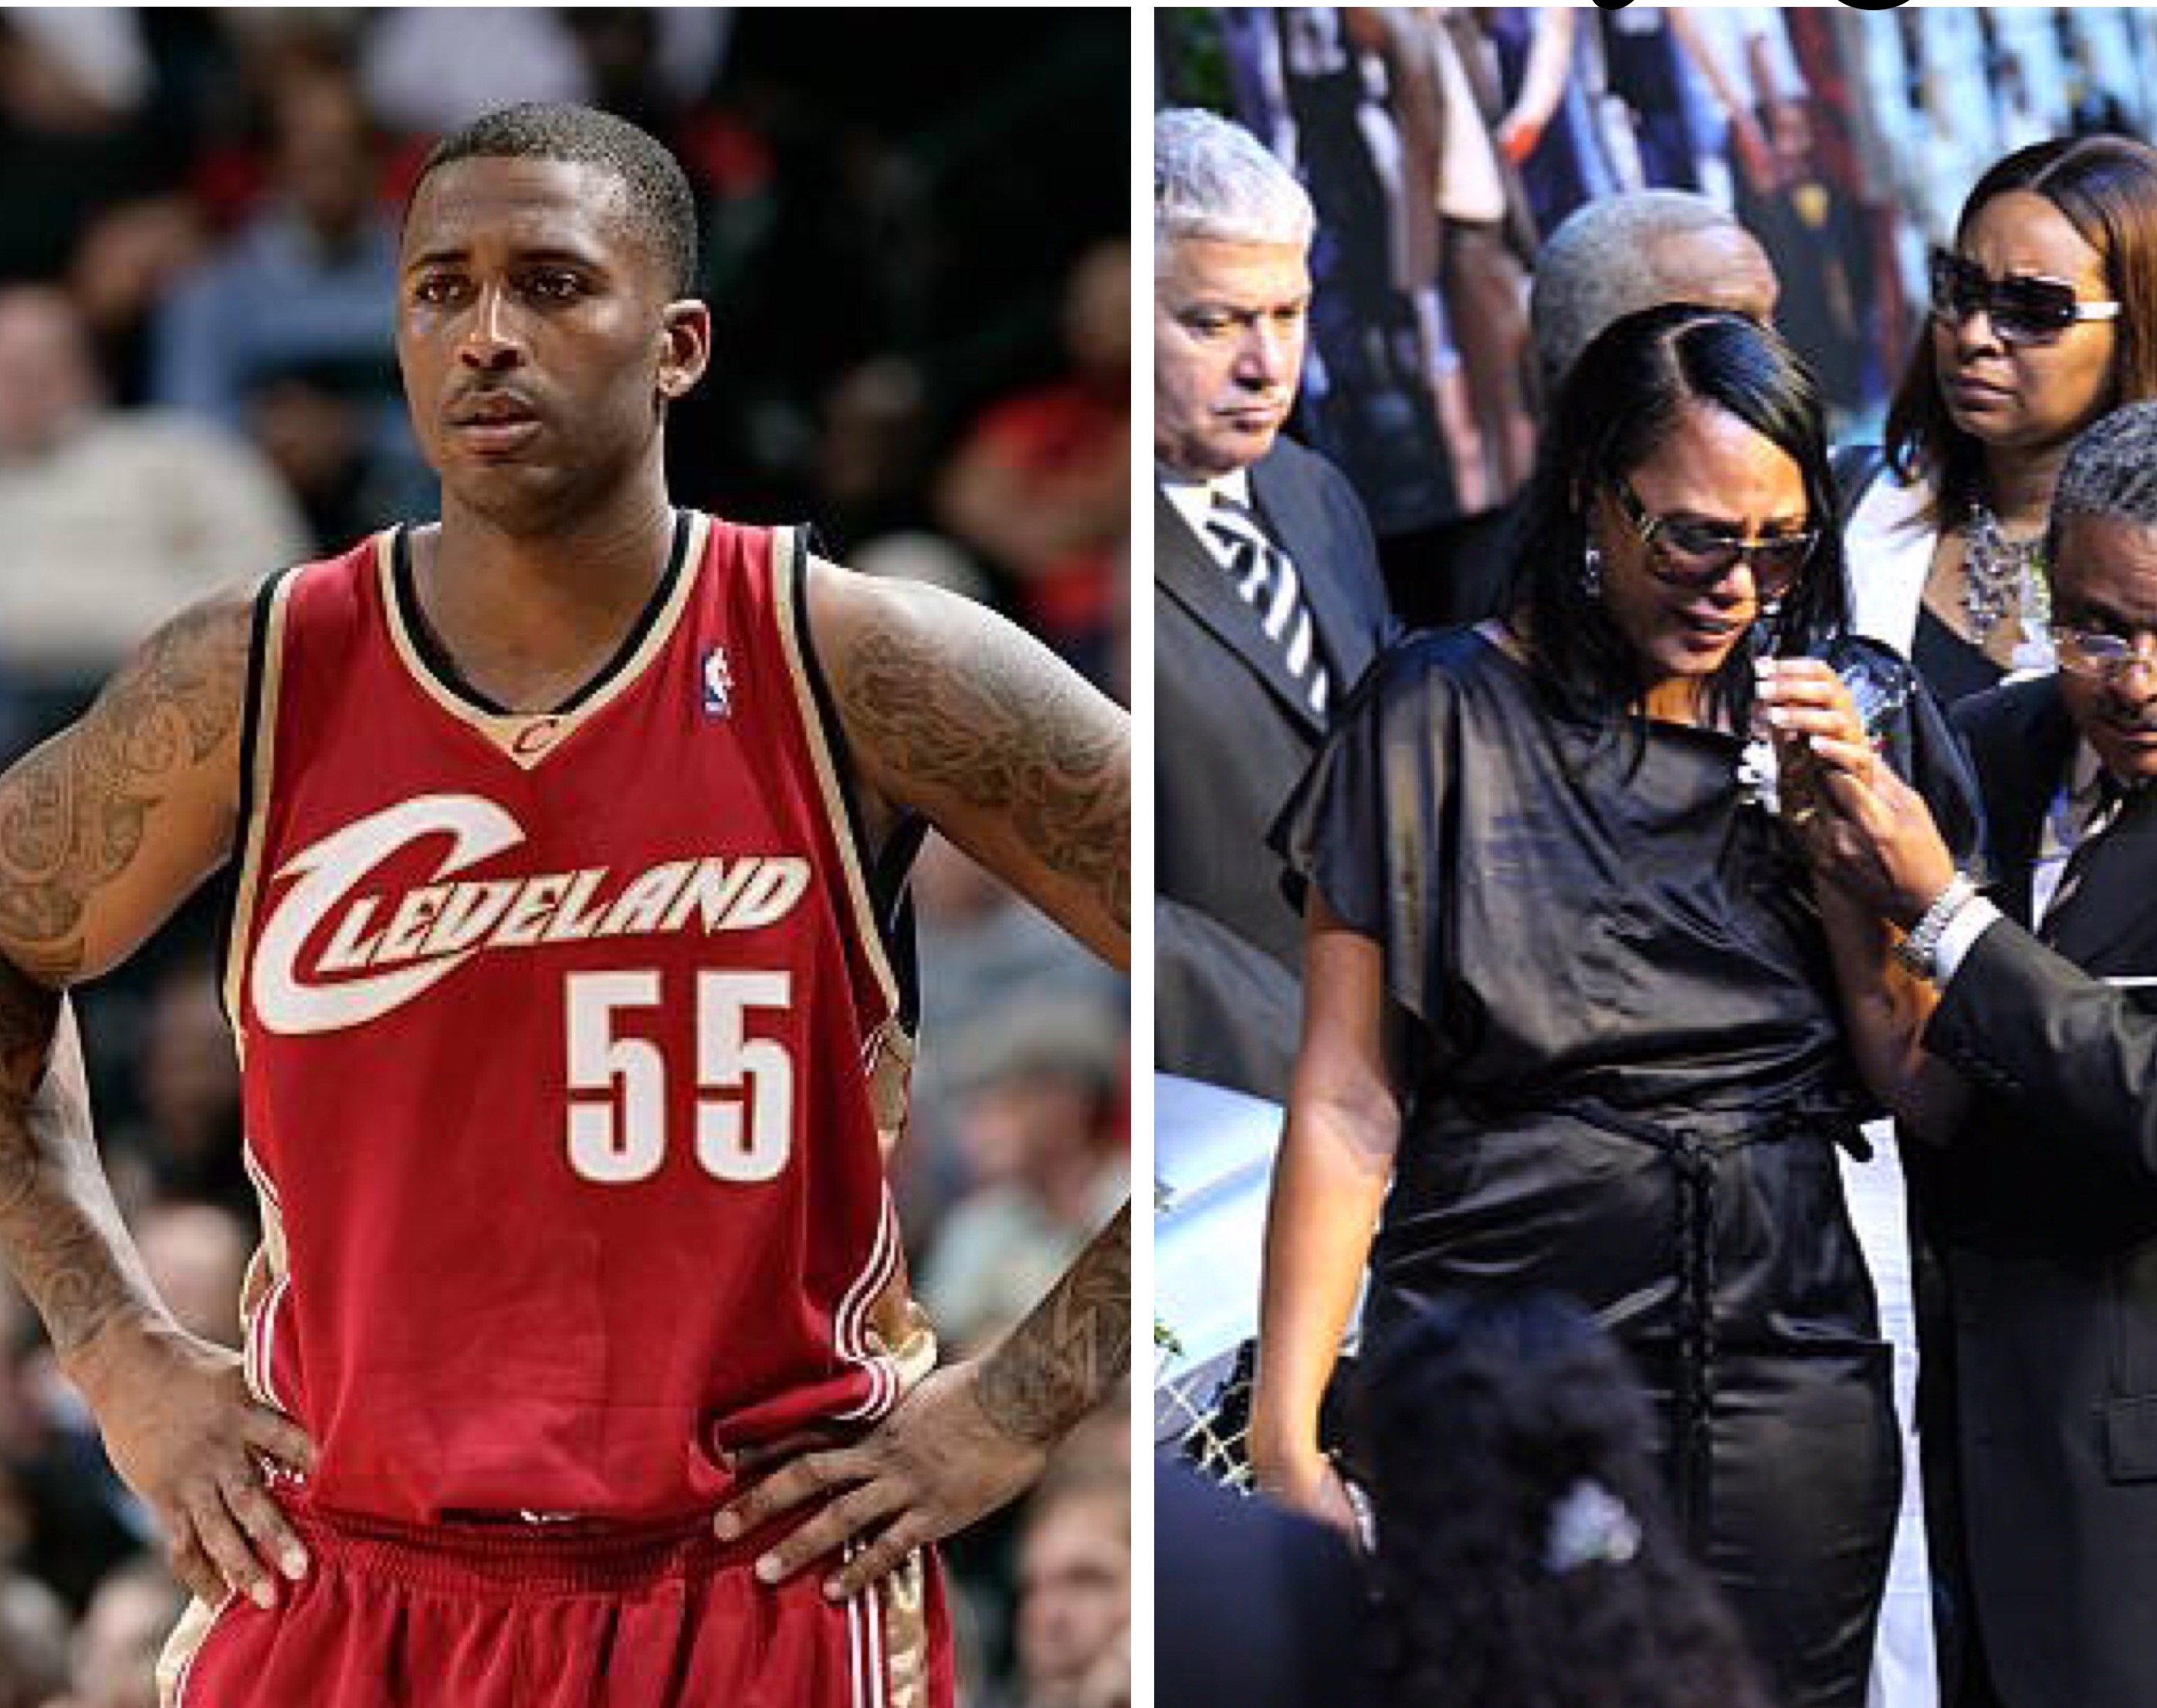 Ex-wife of NBA player Lorenzen Wright charged in his 2010 slaying - The Shade Room2794 x 2213